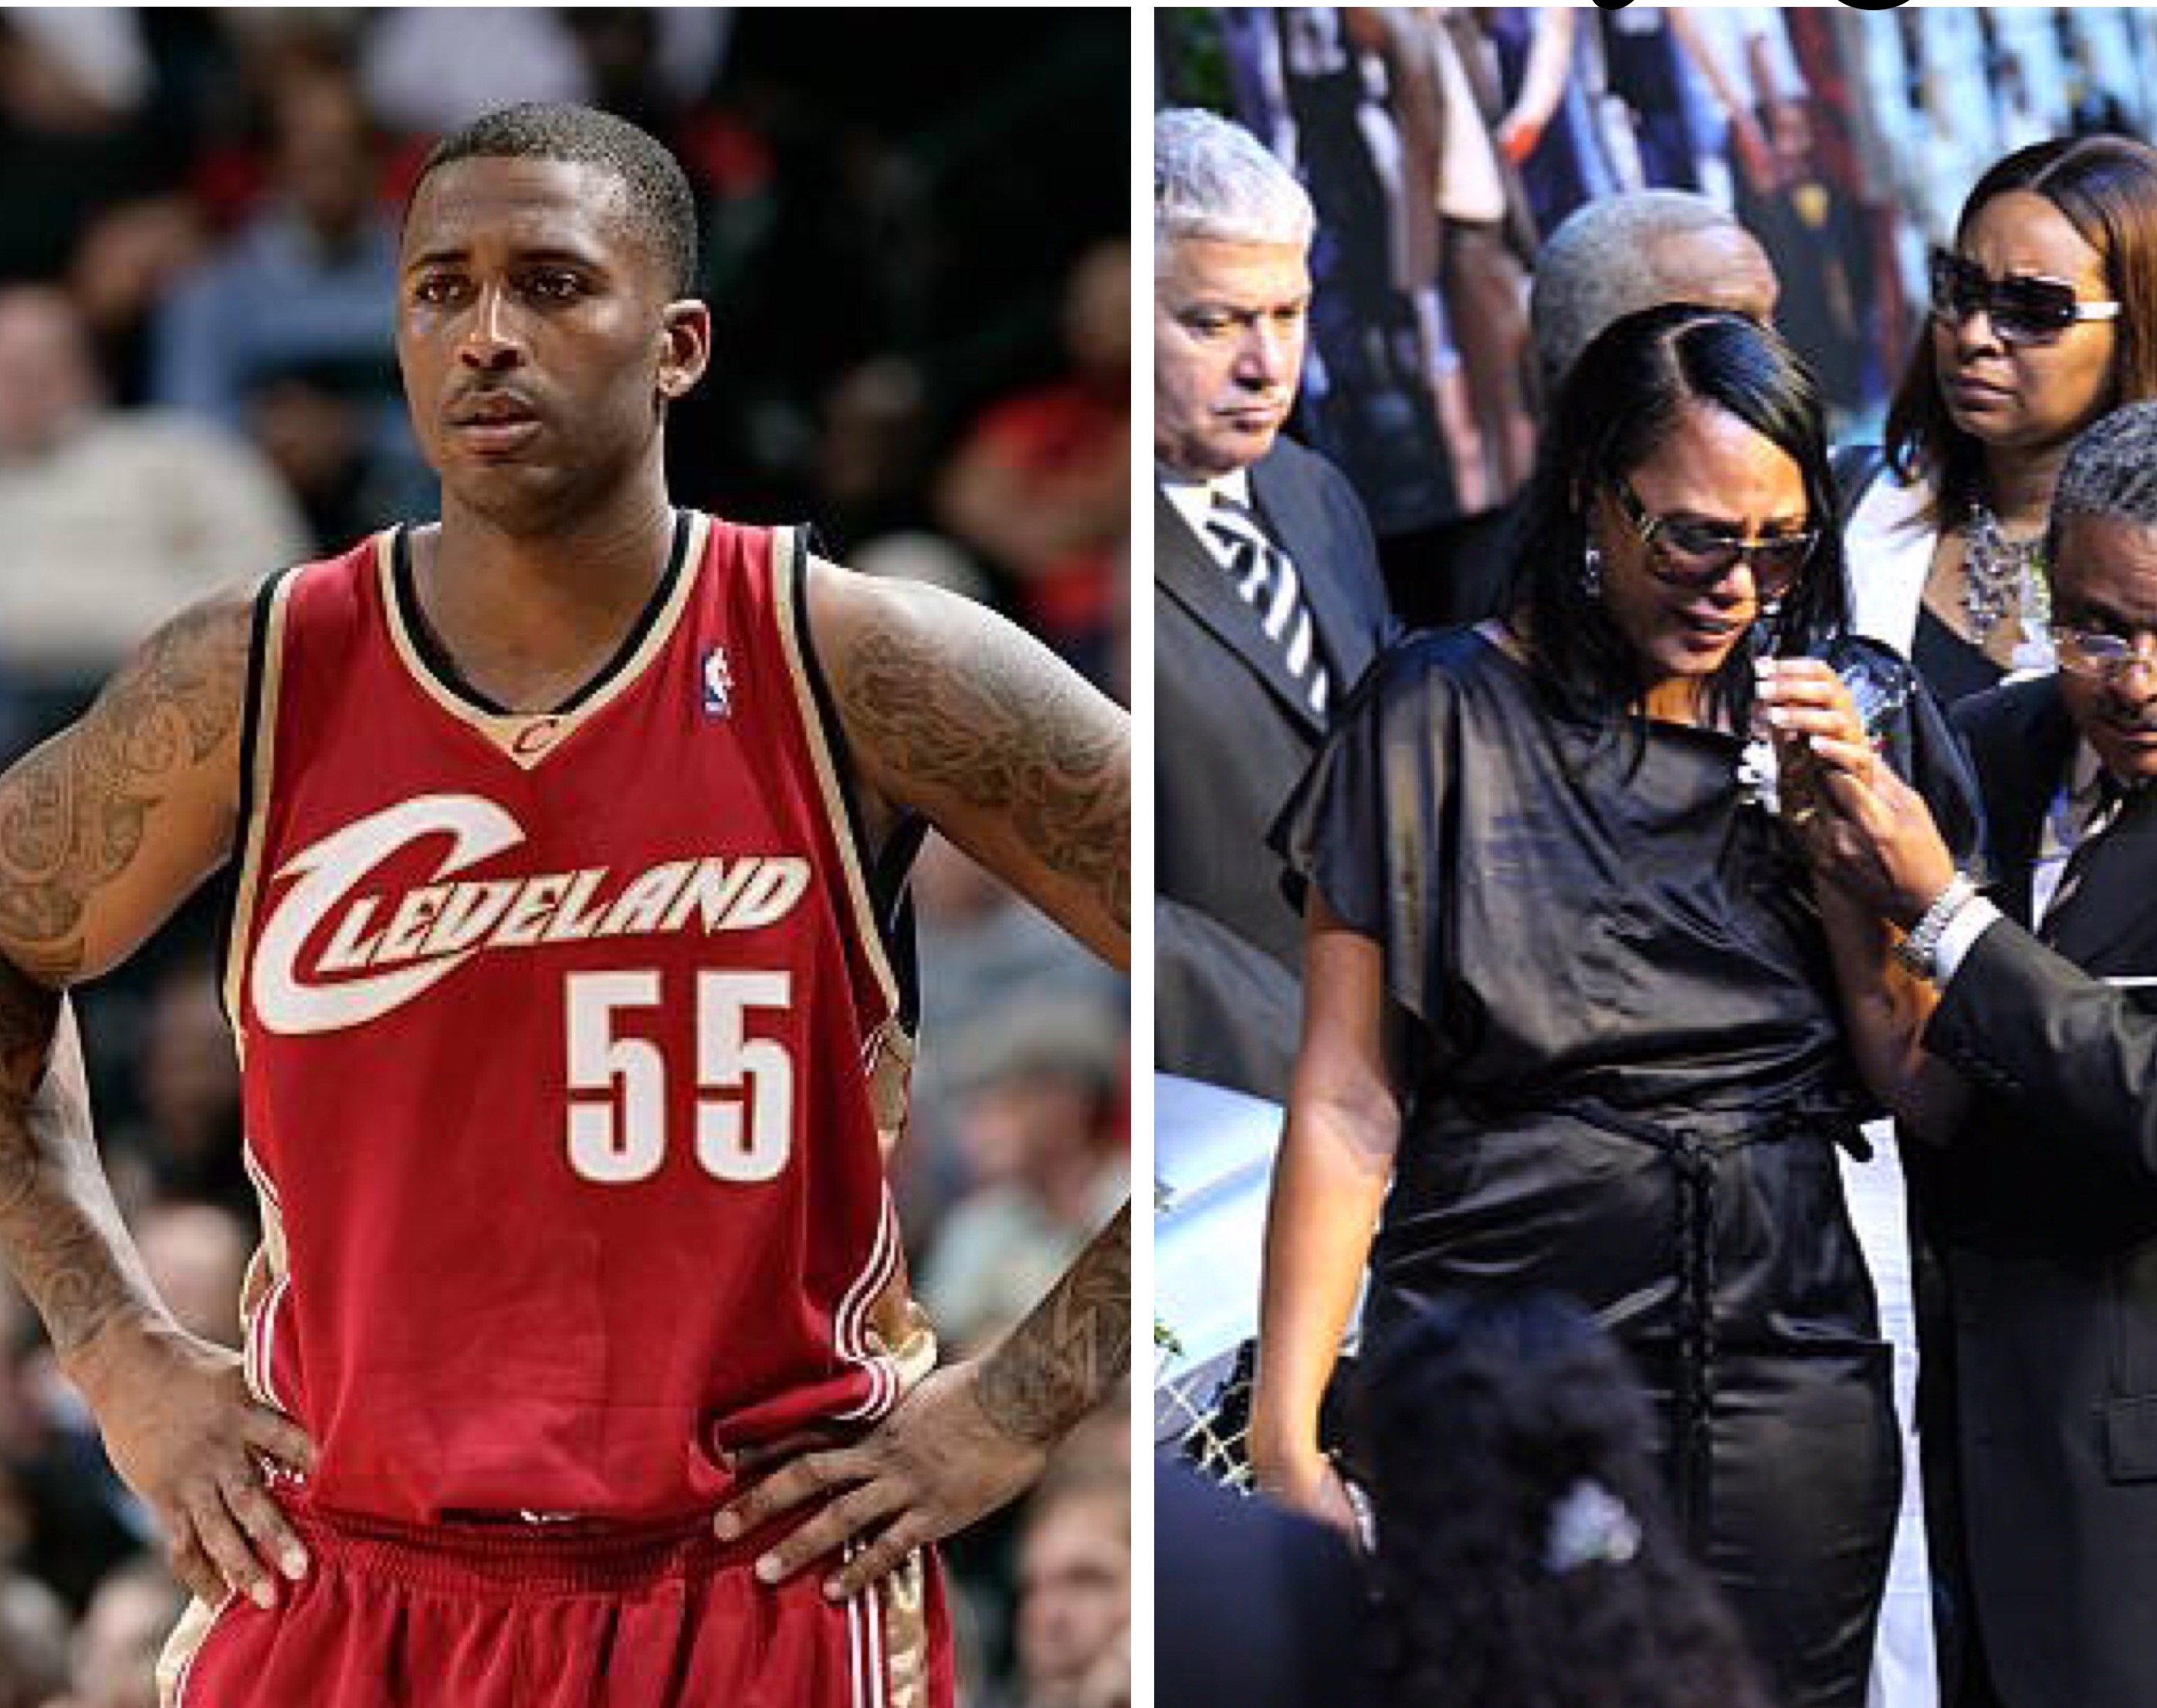 Ex-wife of NBA player Lorenzen Wright charged in his 2010 slaying - The Shade Room2794 x 2213